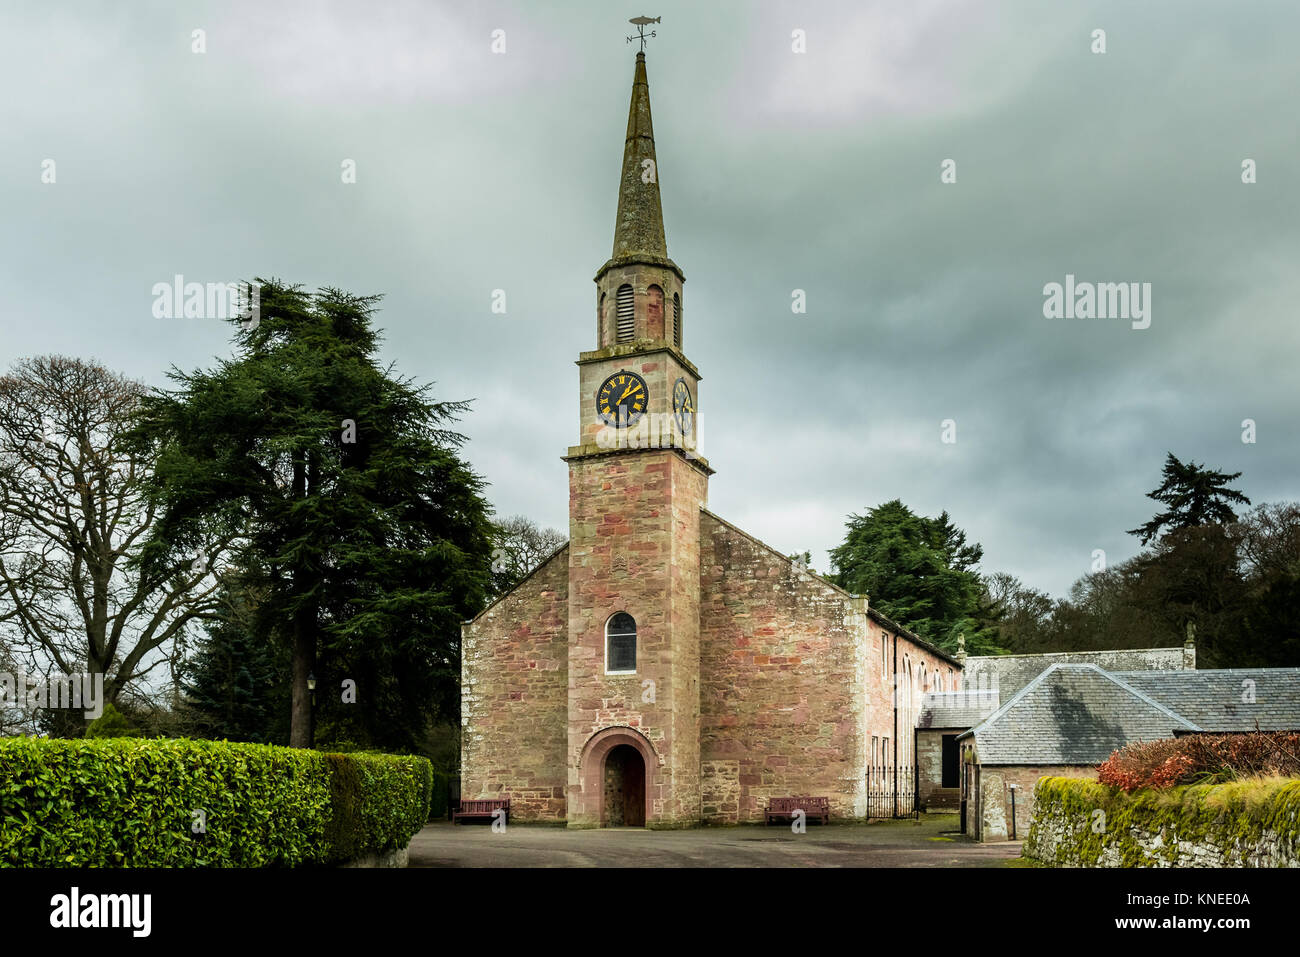 Glamis Church,Glamis,Scotland,UK-December 06,2017: The parish church of Glamis, dedicated to Saint Fergus, was founded in the early medieval period. Stock Photo